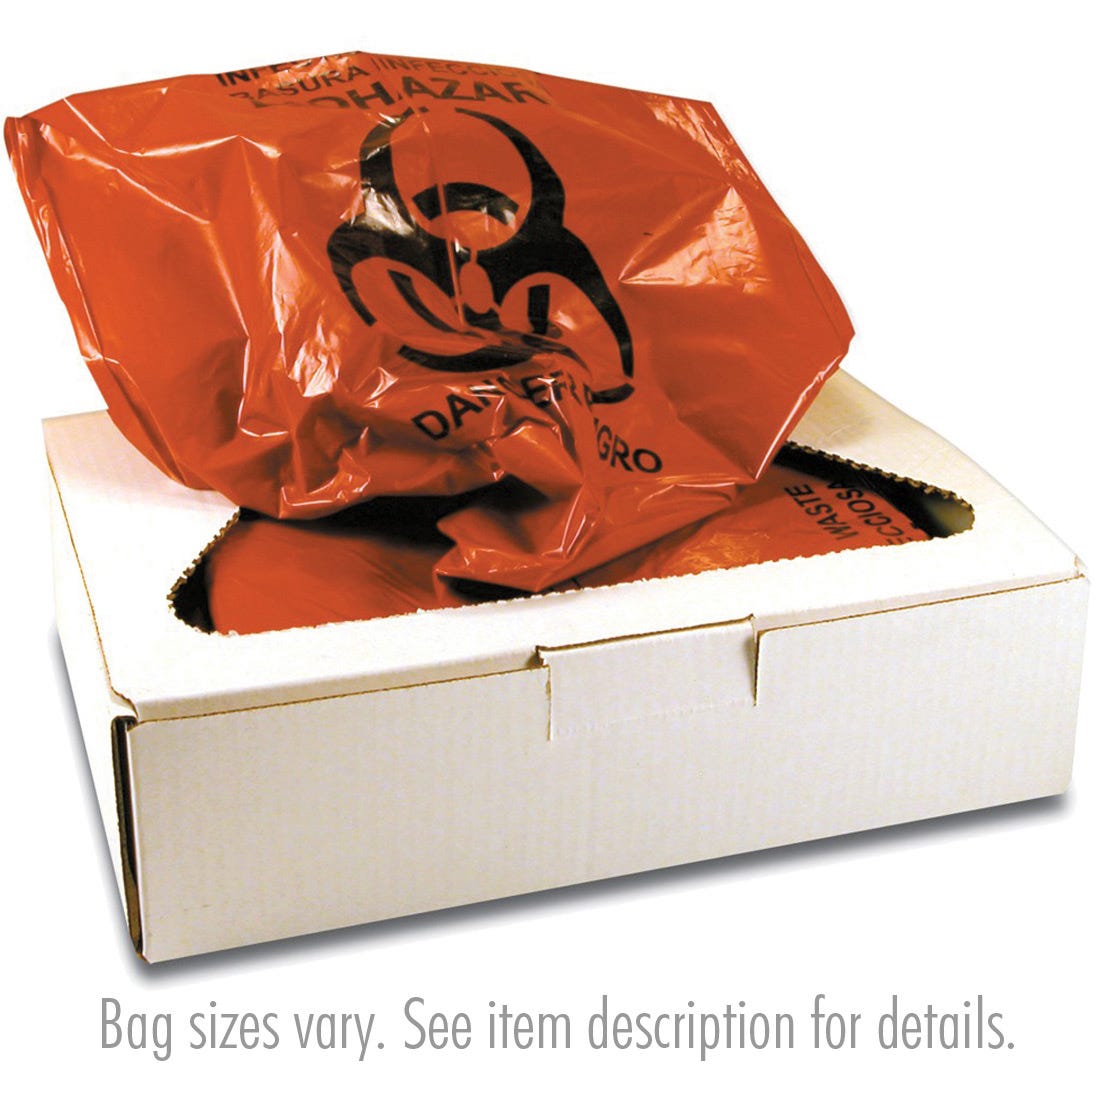 PROTECTOR INFECTIOUS WASTE Bags - 24" x 23", 10 Gallon